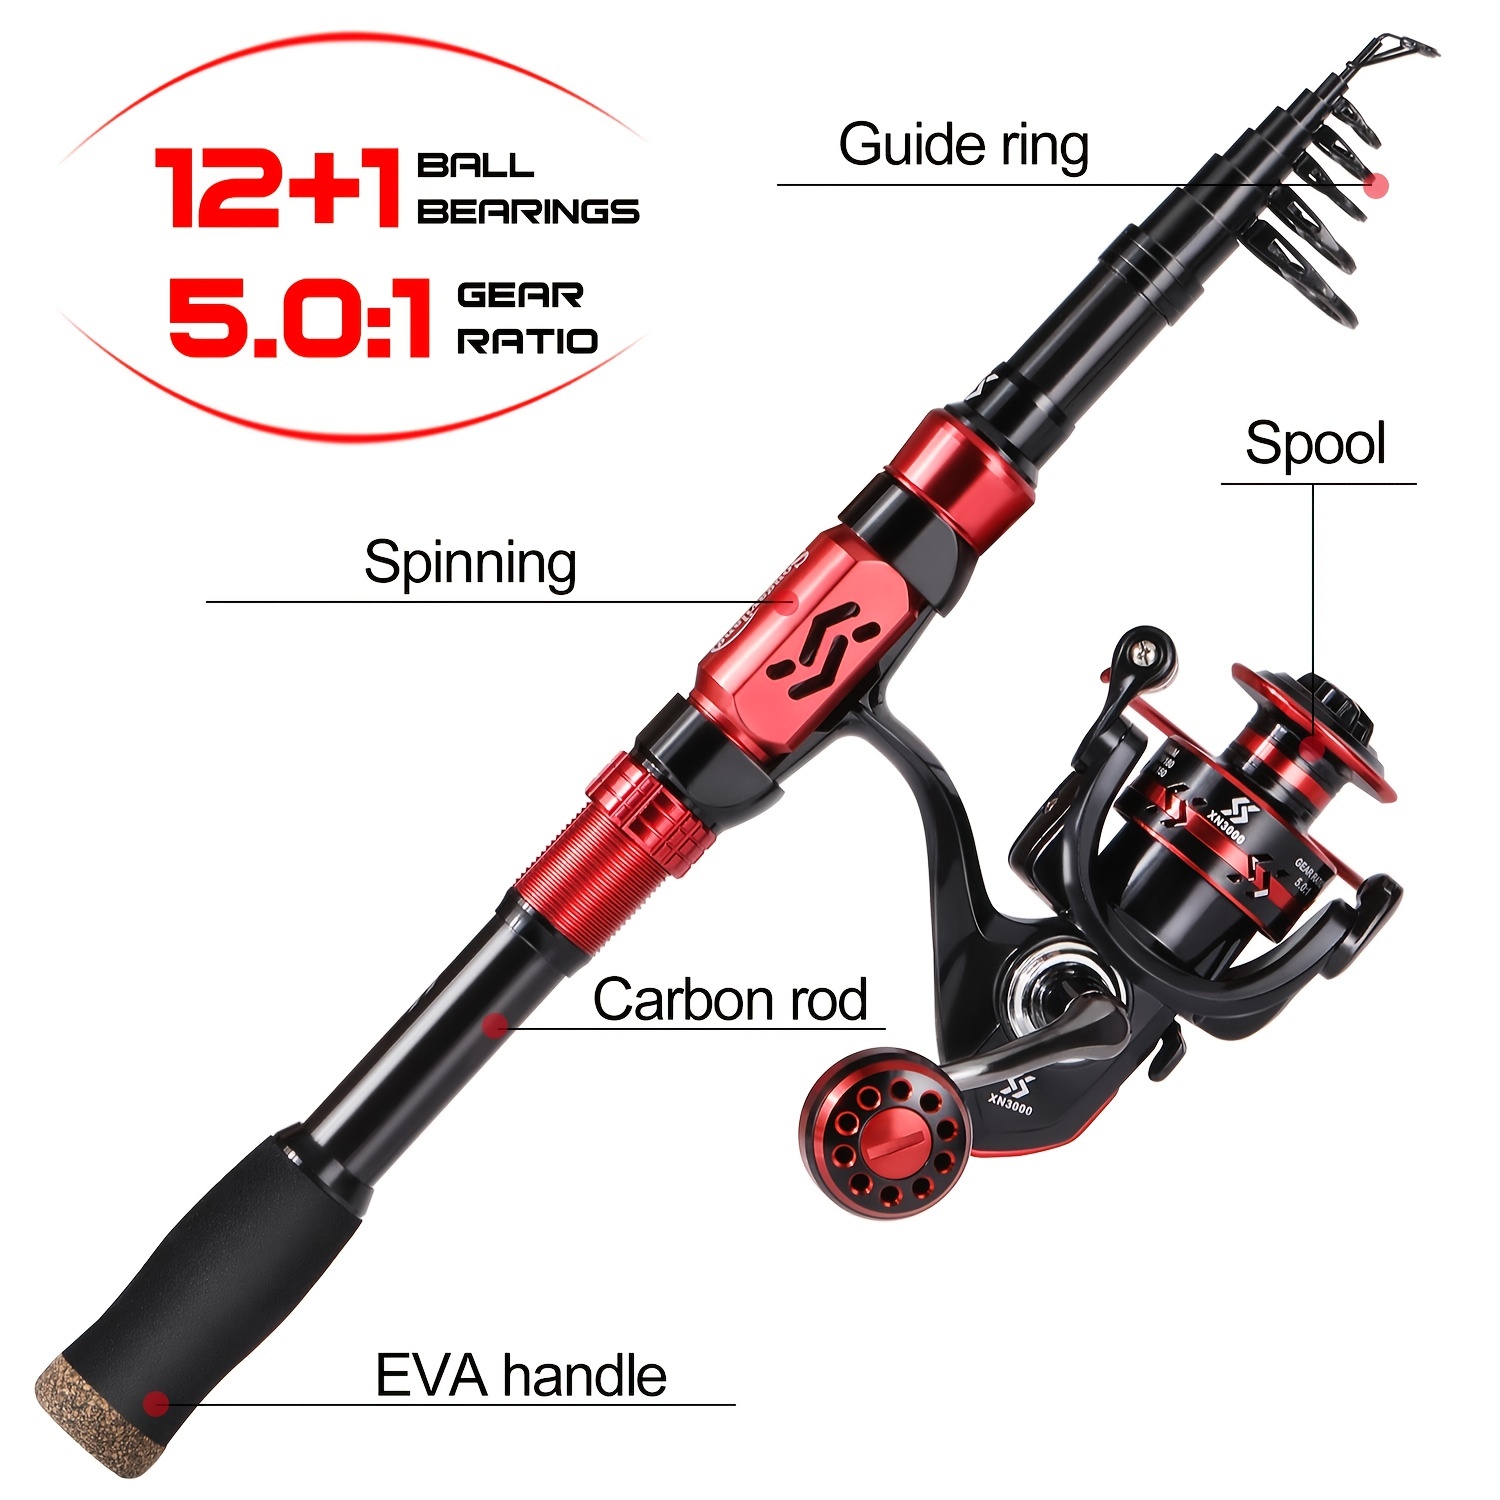 Sougayilang Telescopic Fishing Rod and Reel Combo - 12+1BB Spinning Reel  for Saltwater and Freshwater Fishing, Ideal for Travel and Easy Storage